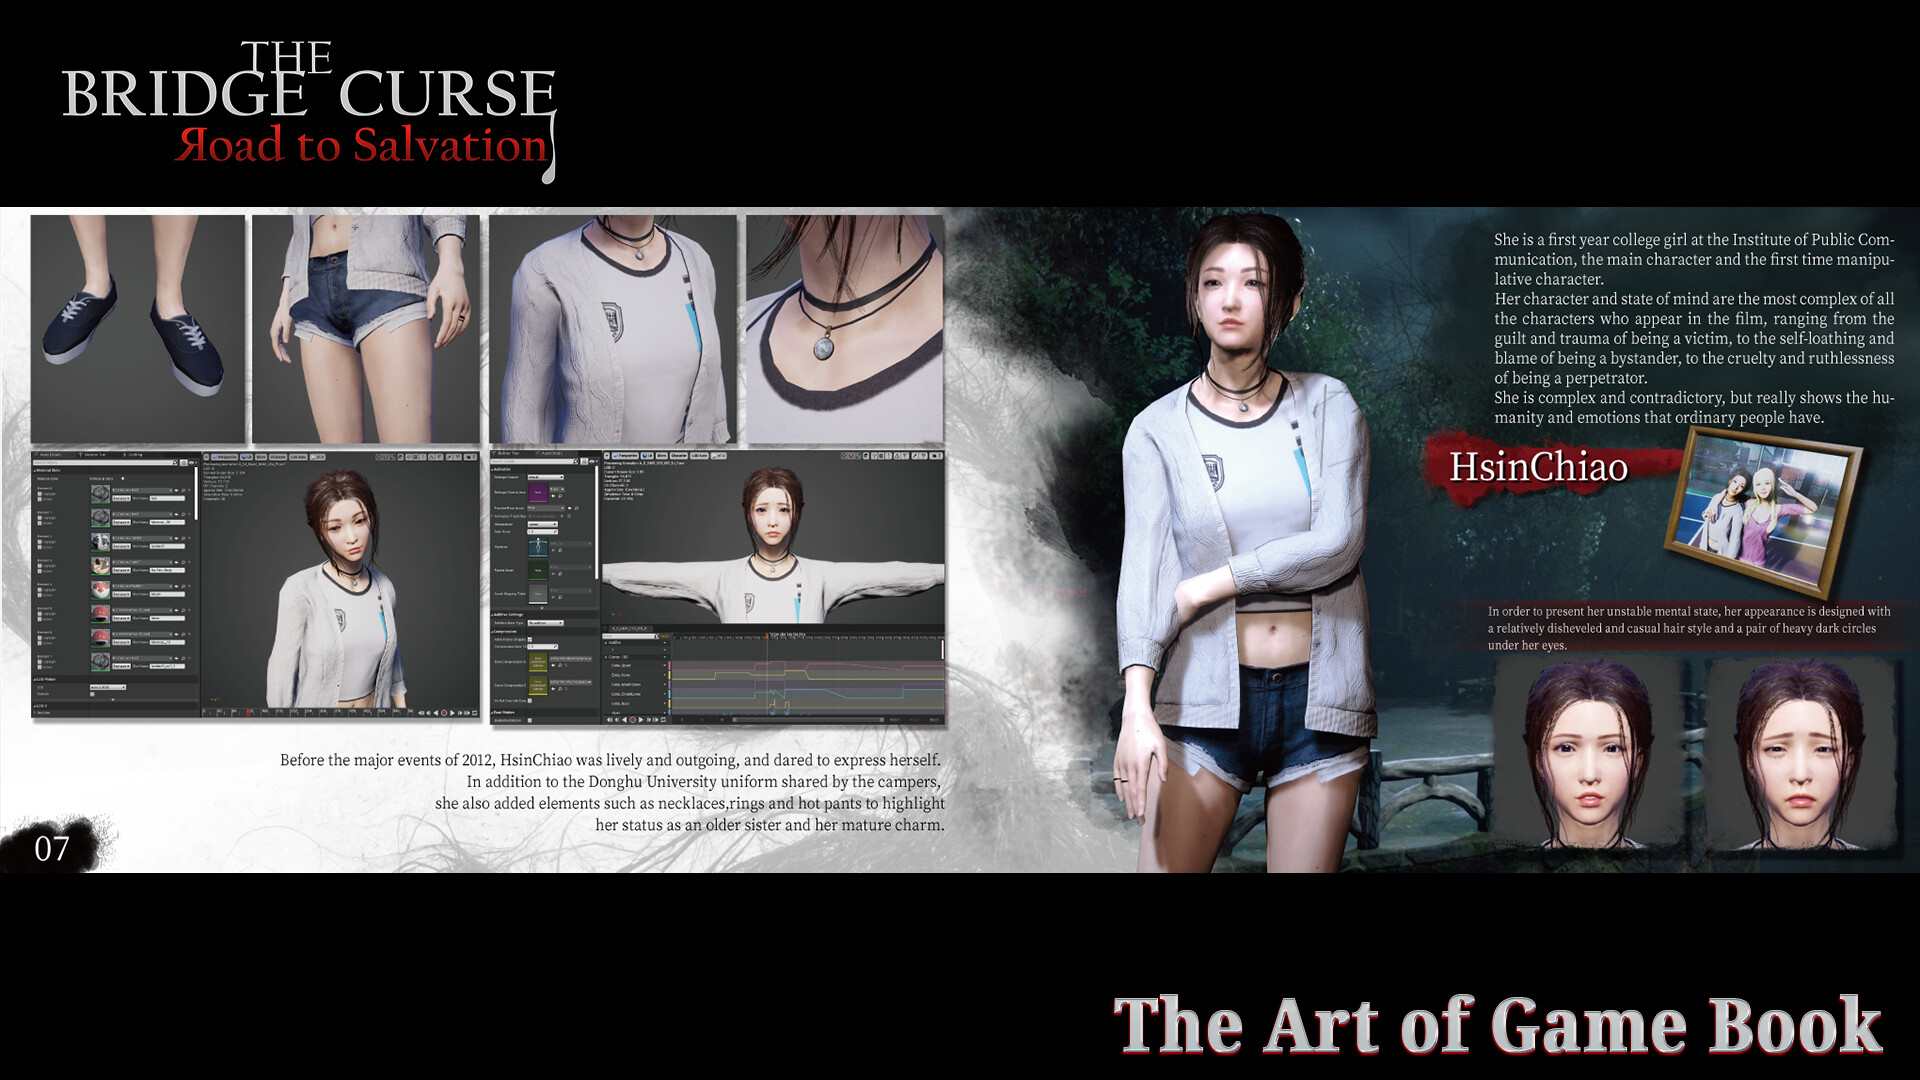 The Bridge Curse Road to Salvation The art of game Book Featured Screenshot #1